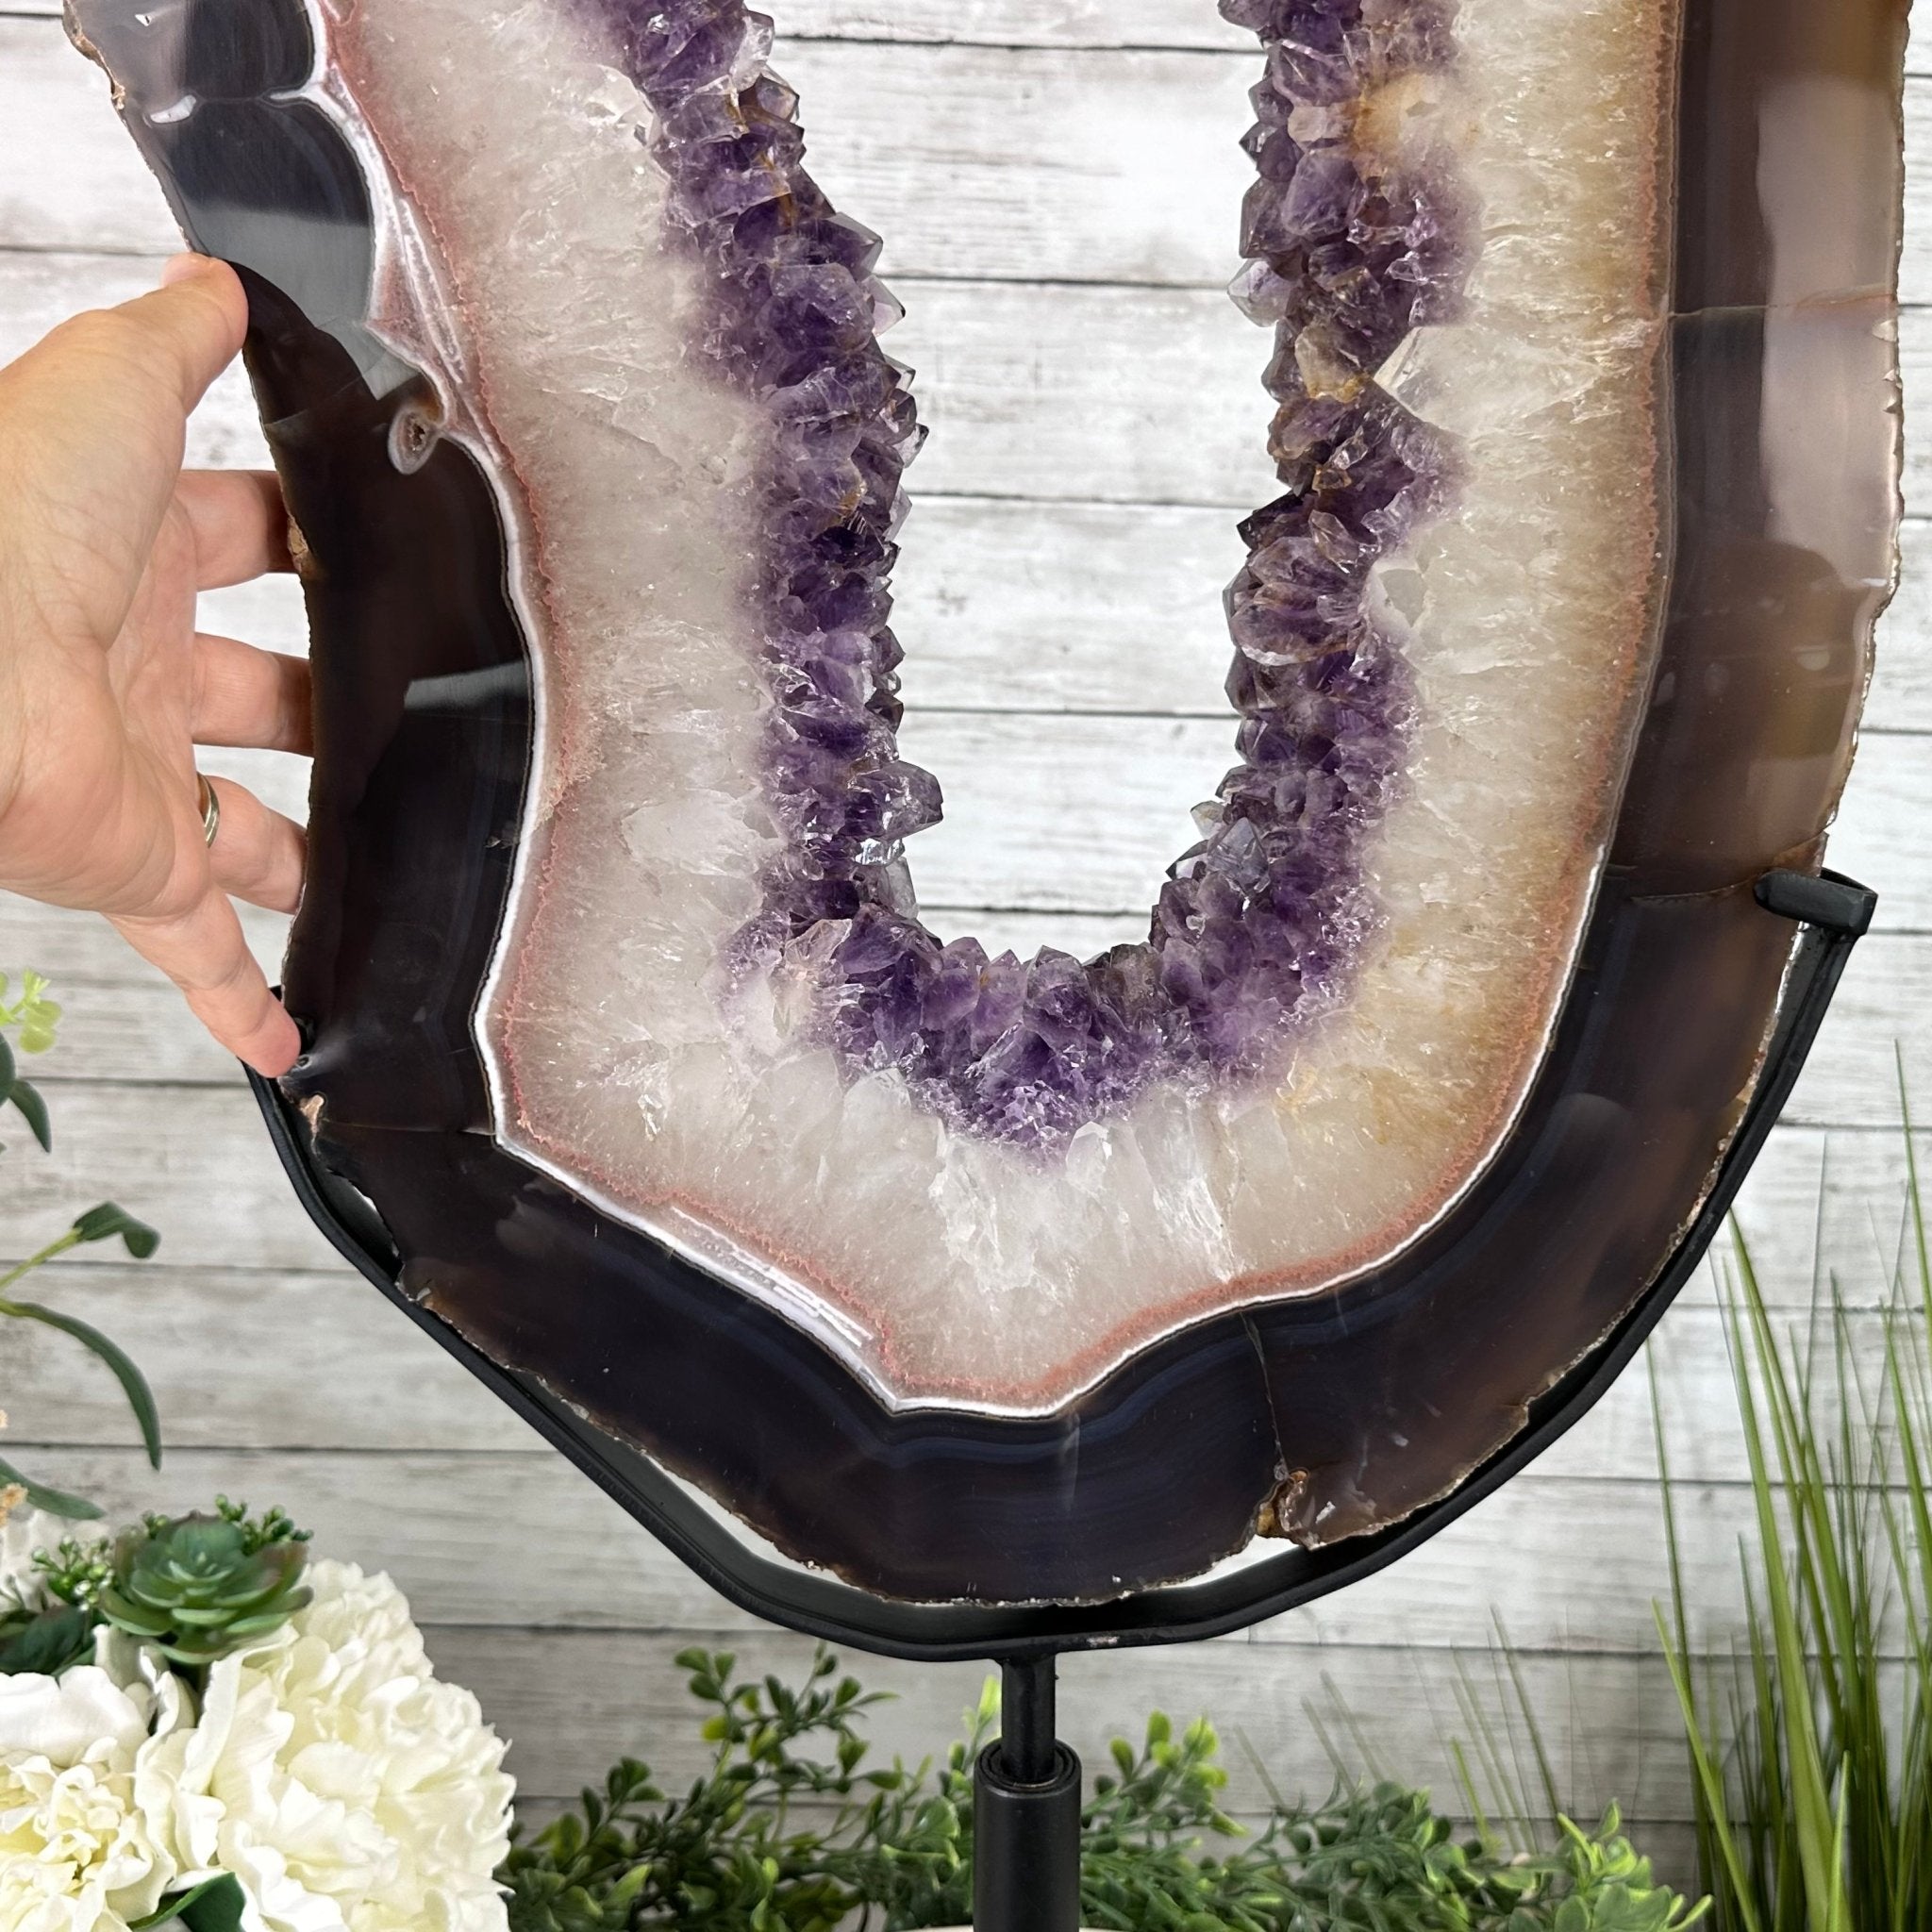 Extra Plus Quality Brazilian Amethyst Crystal Portal on a Rotating Stand, 22.1 lbs & 31.25" tall Model #5604-0126 by Brazil Gems - Brazil GemsBrazil GemsExtra Plus Quality Brazilian Amethyst Crystal Portal on a Rotating Stand, 22.1 lbs & 31.25" tall Model #5604-0126 by Brazil GemsPortals on Rotating Bases5604-0126